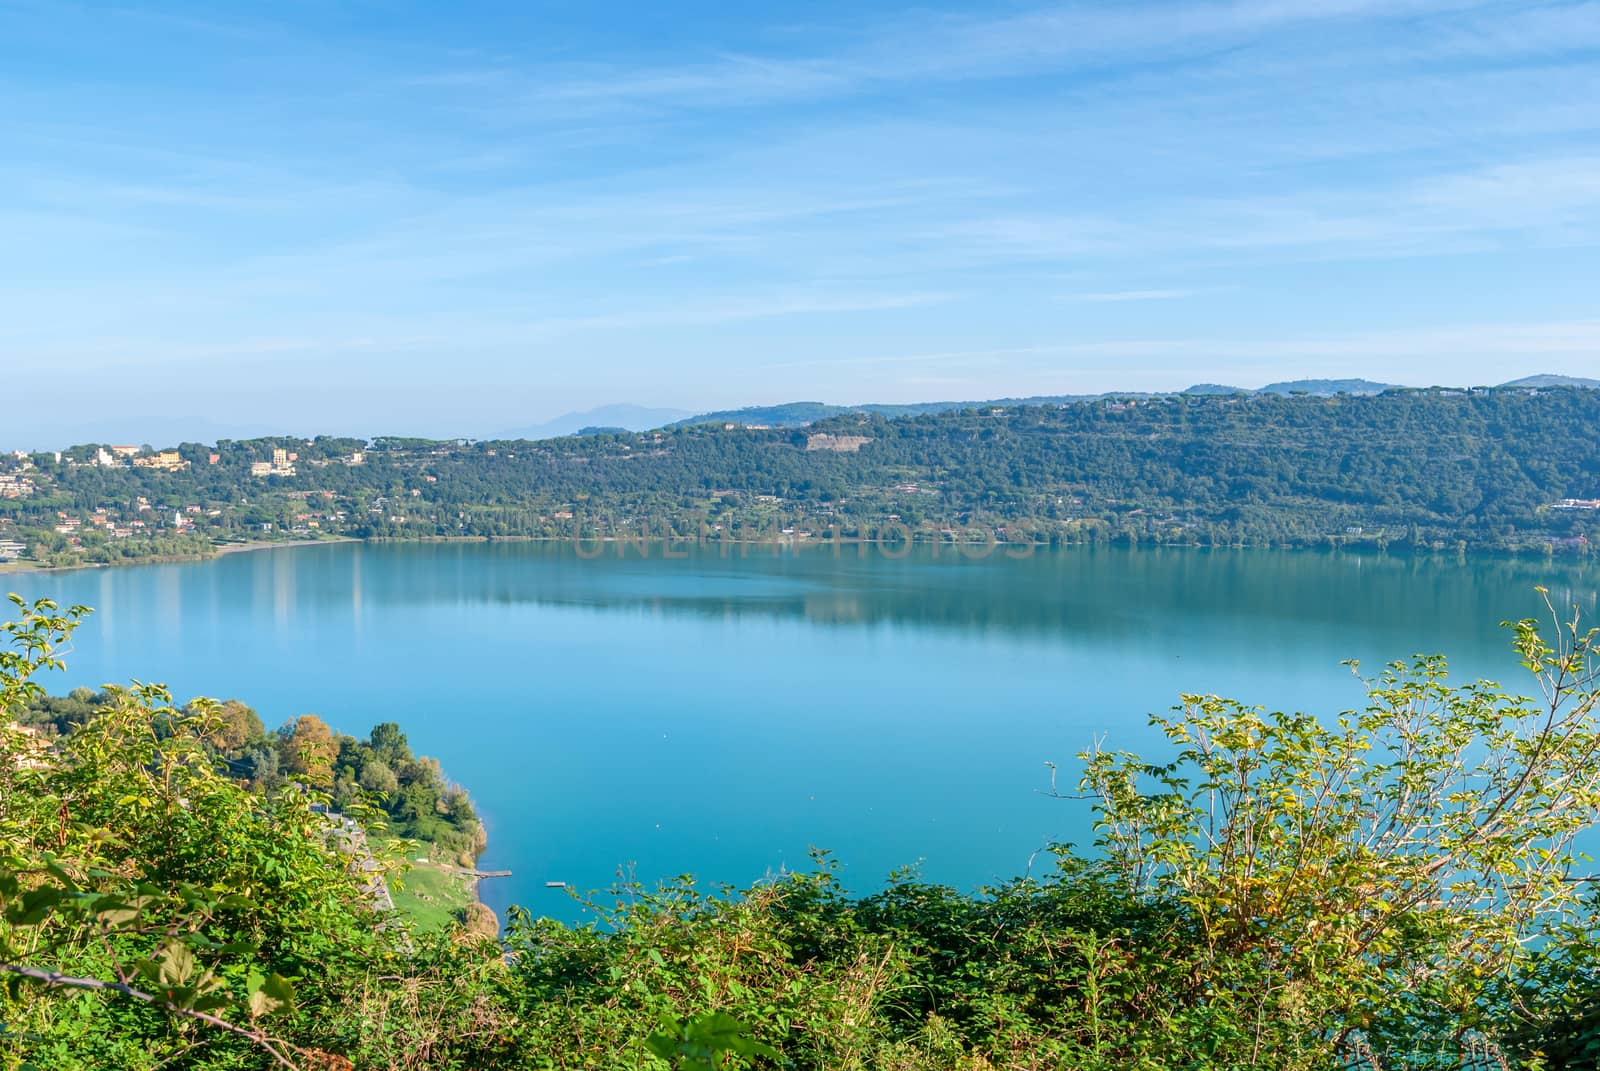 View of Lake Albano from the town of Castel Gandolfo, in the Albano Hills, south of Rome, Italy